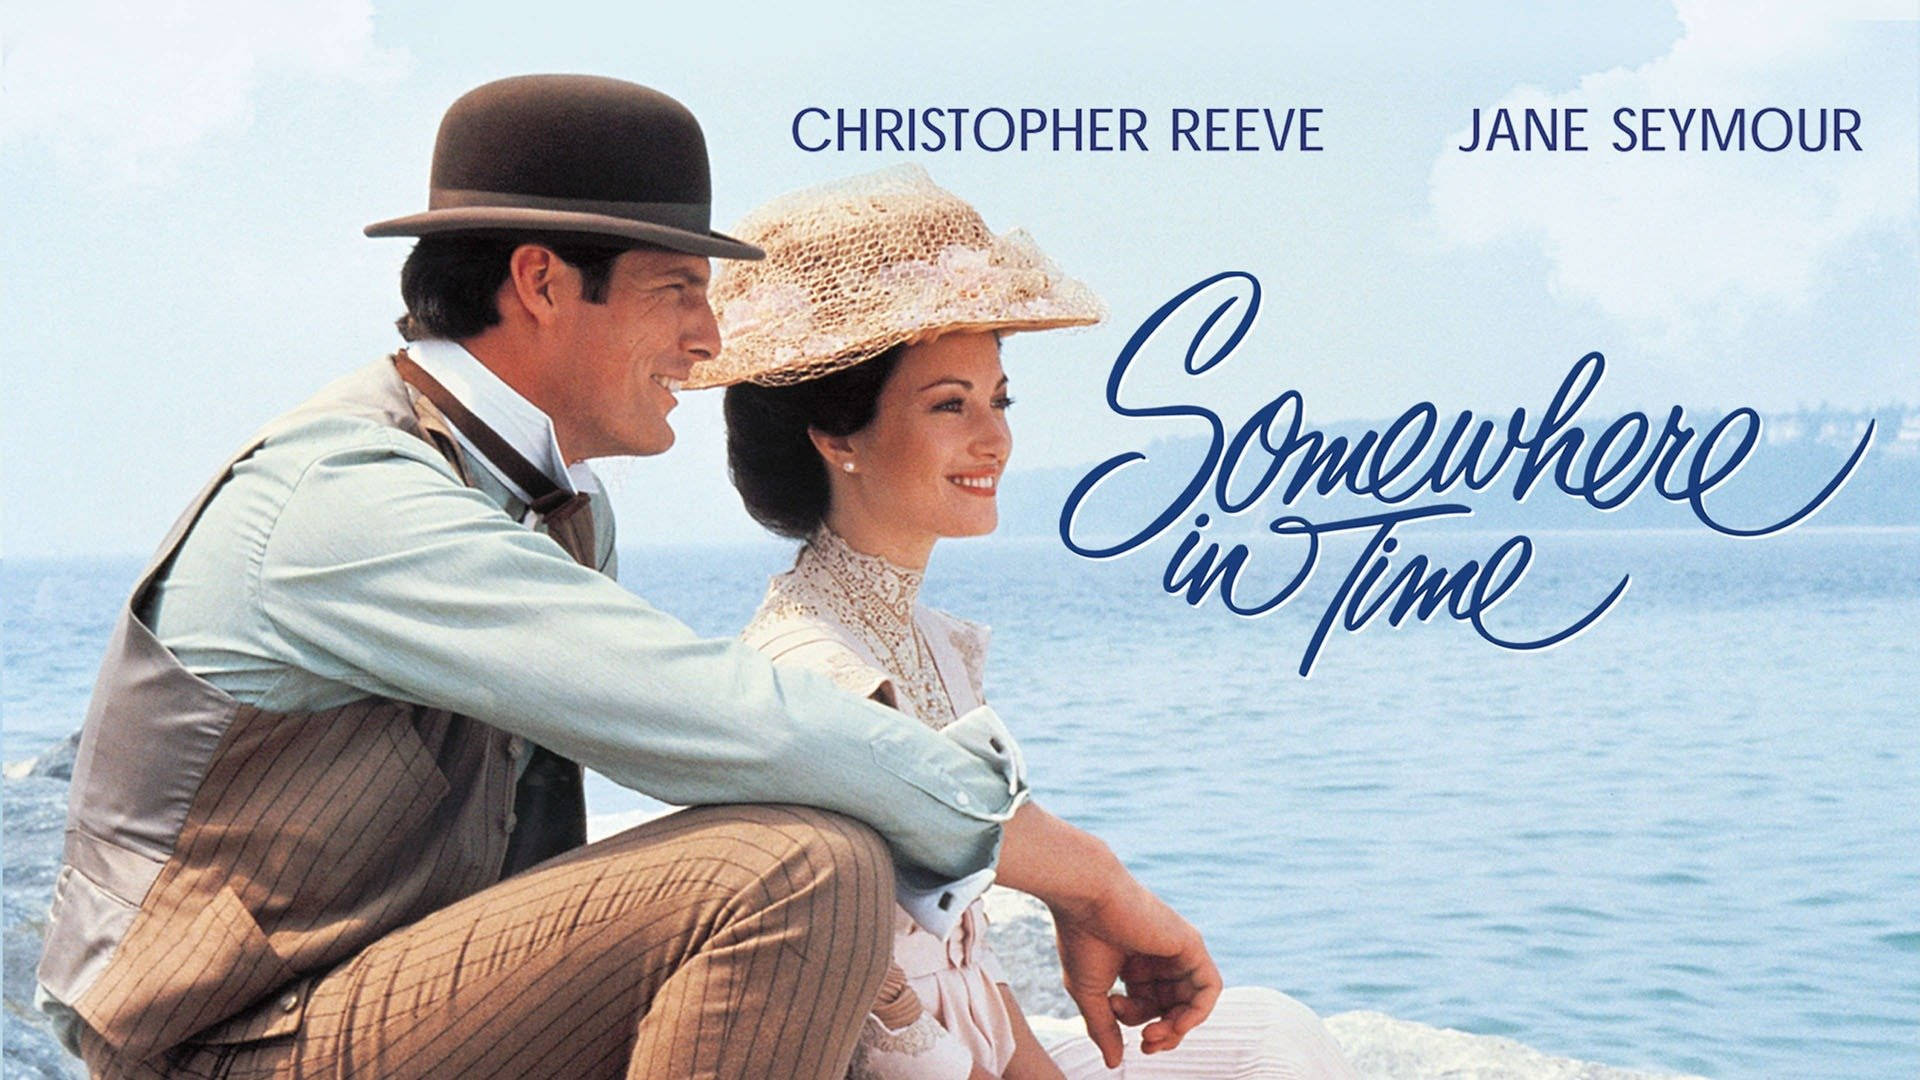 Christopher Reeve Somewhere In Time Wallpaper